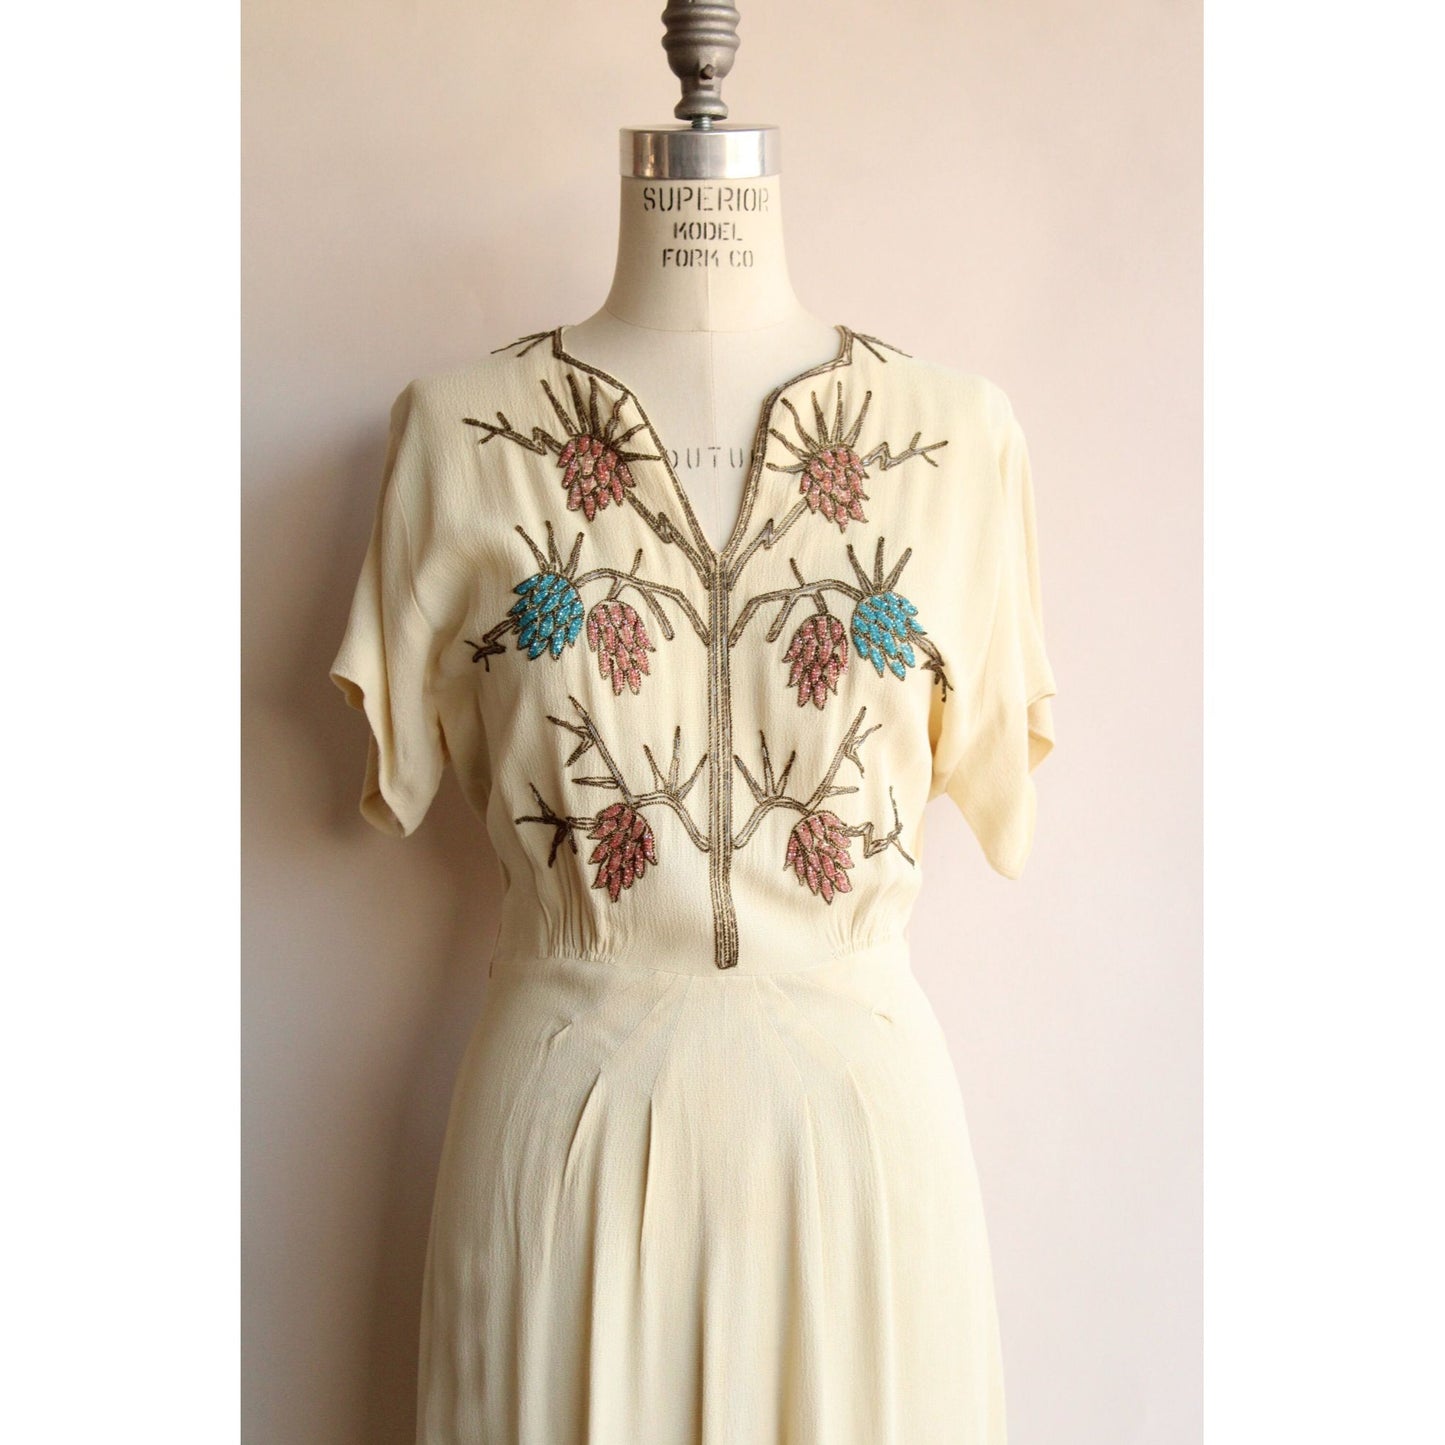 Vintage 1940s Best & Co Rayon Cream Dress with Beaded Bodice